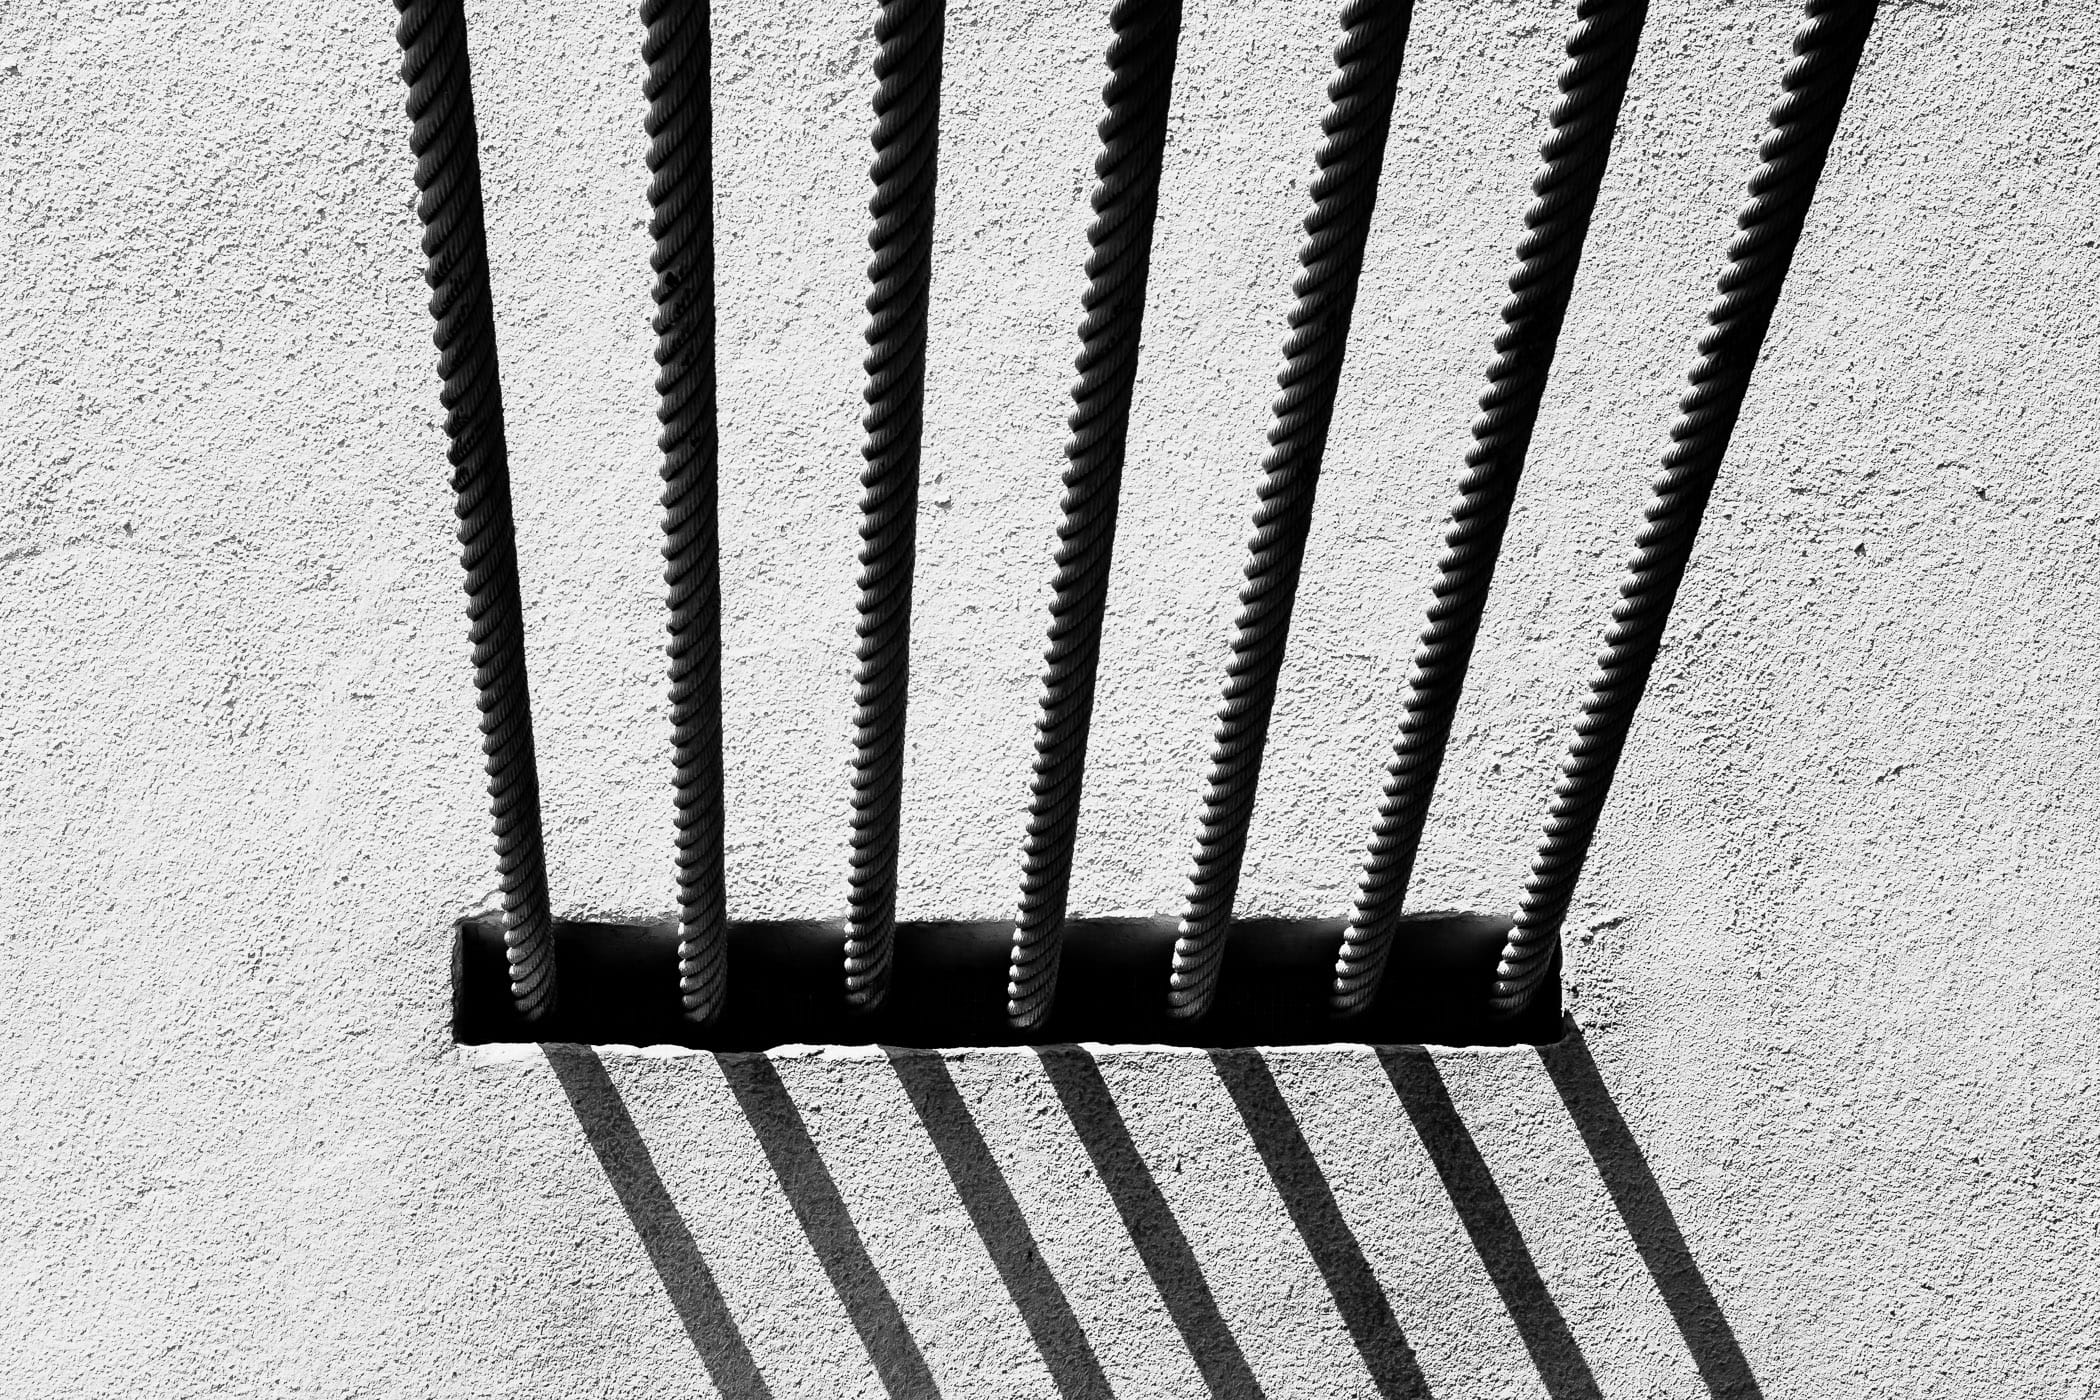 Detail of support cables at the Waco Suspension Bridge, Waco, Texas.